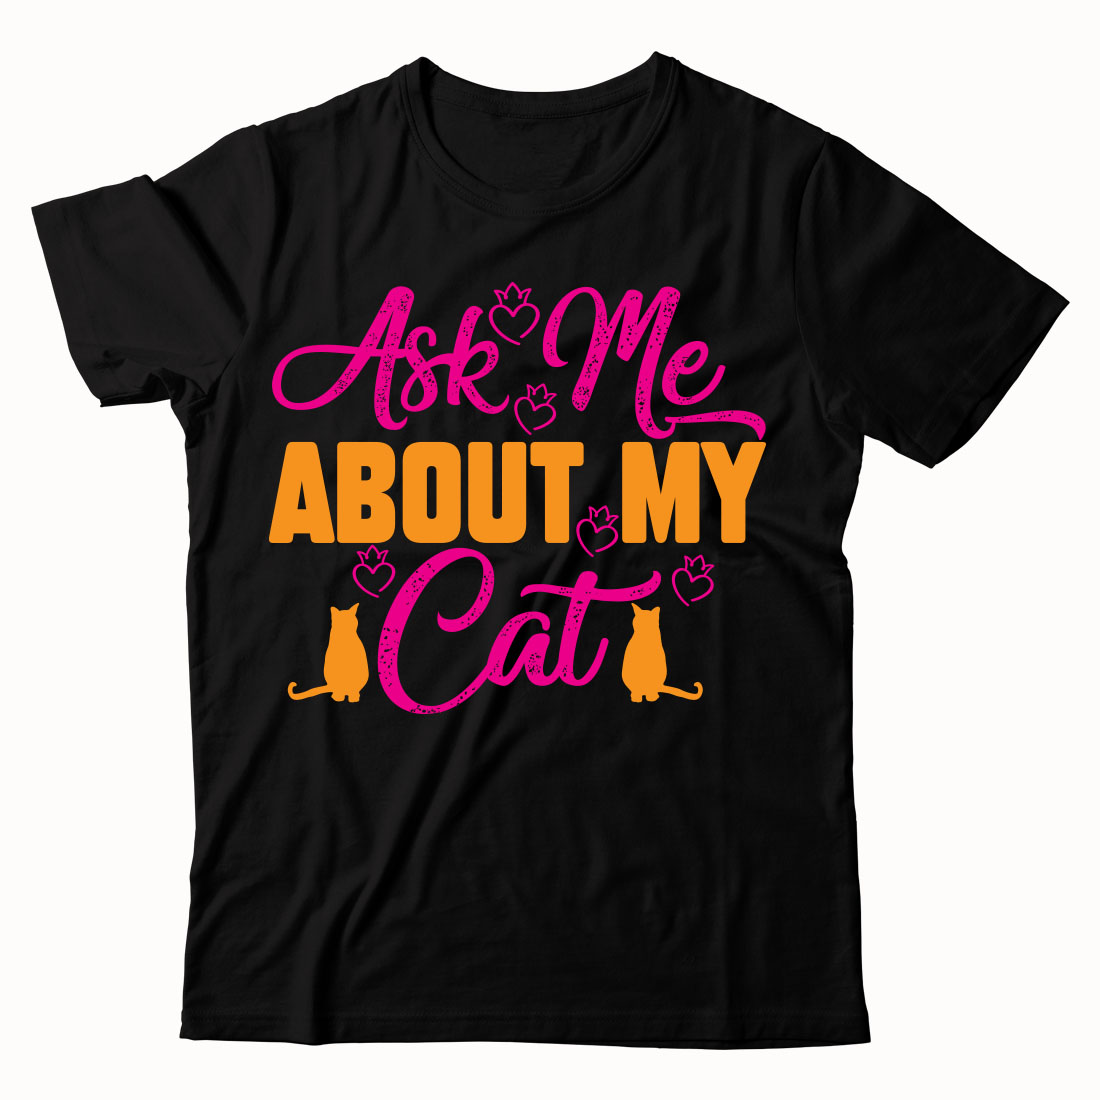 Black t - shirt that says ask me about my cat.